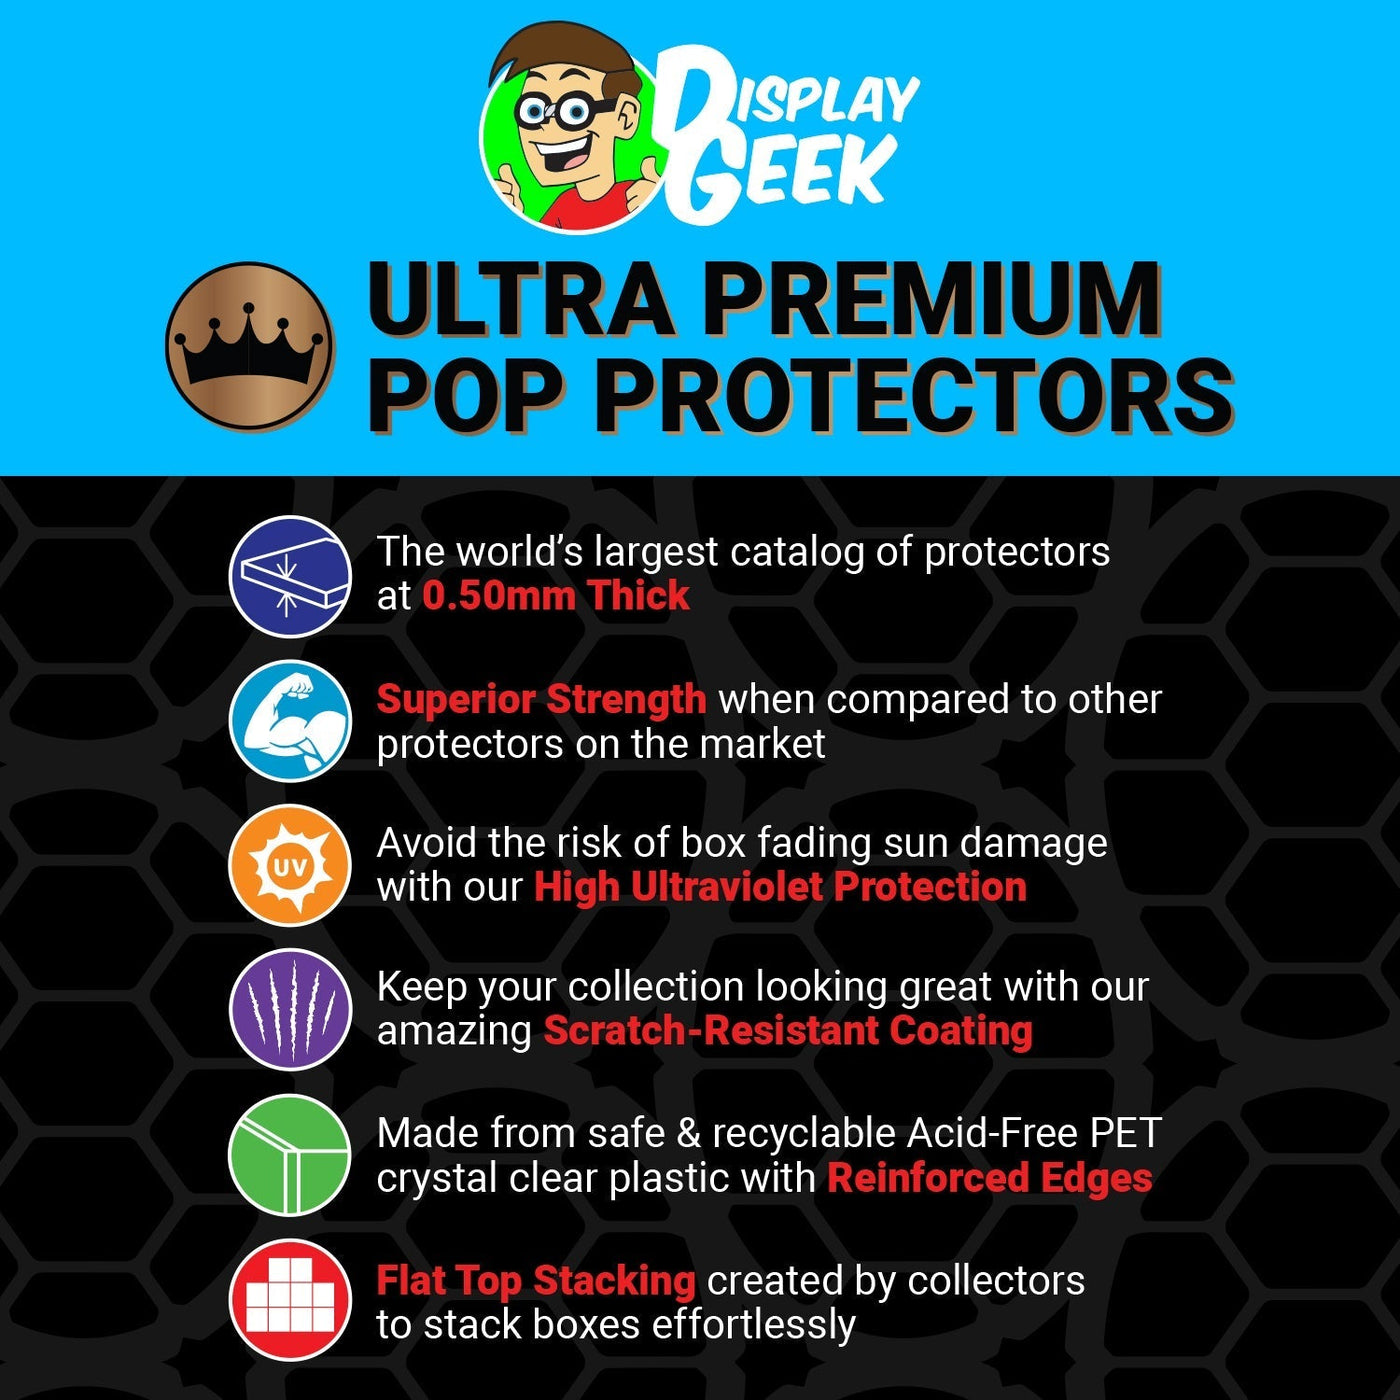 Pop Protector for 10 inch Echo Glow in the Dark #906 Jumbo Funko Pop on The Protector Guide App by Display Geek